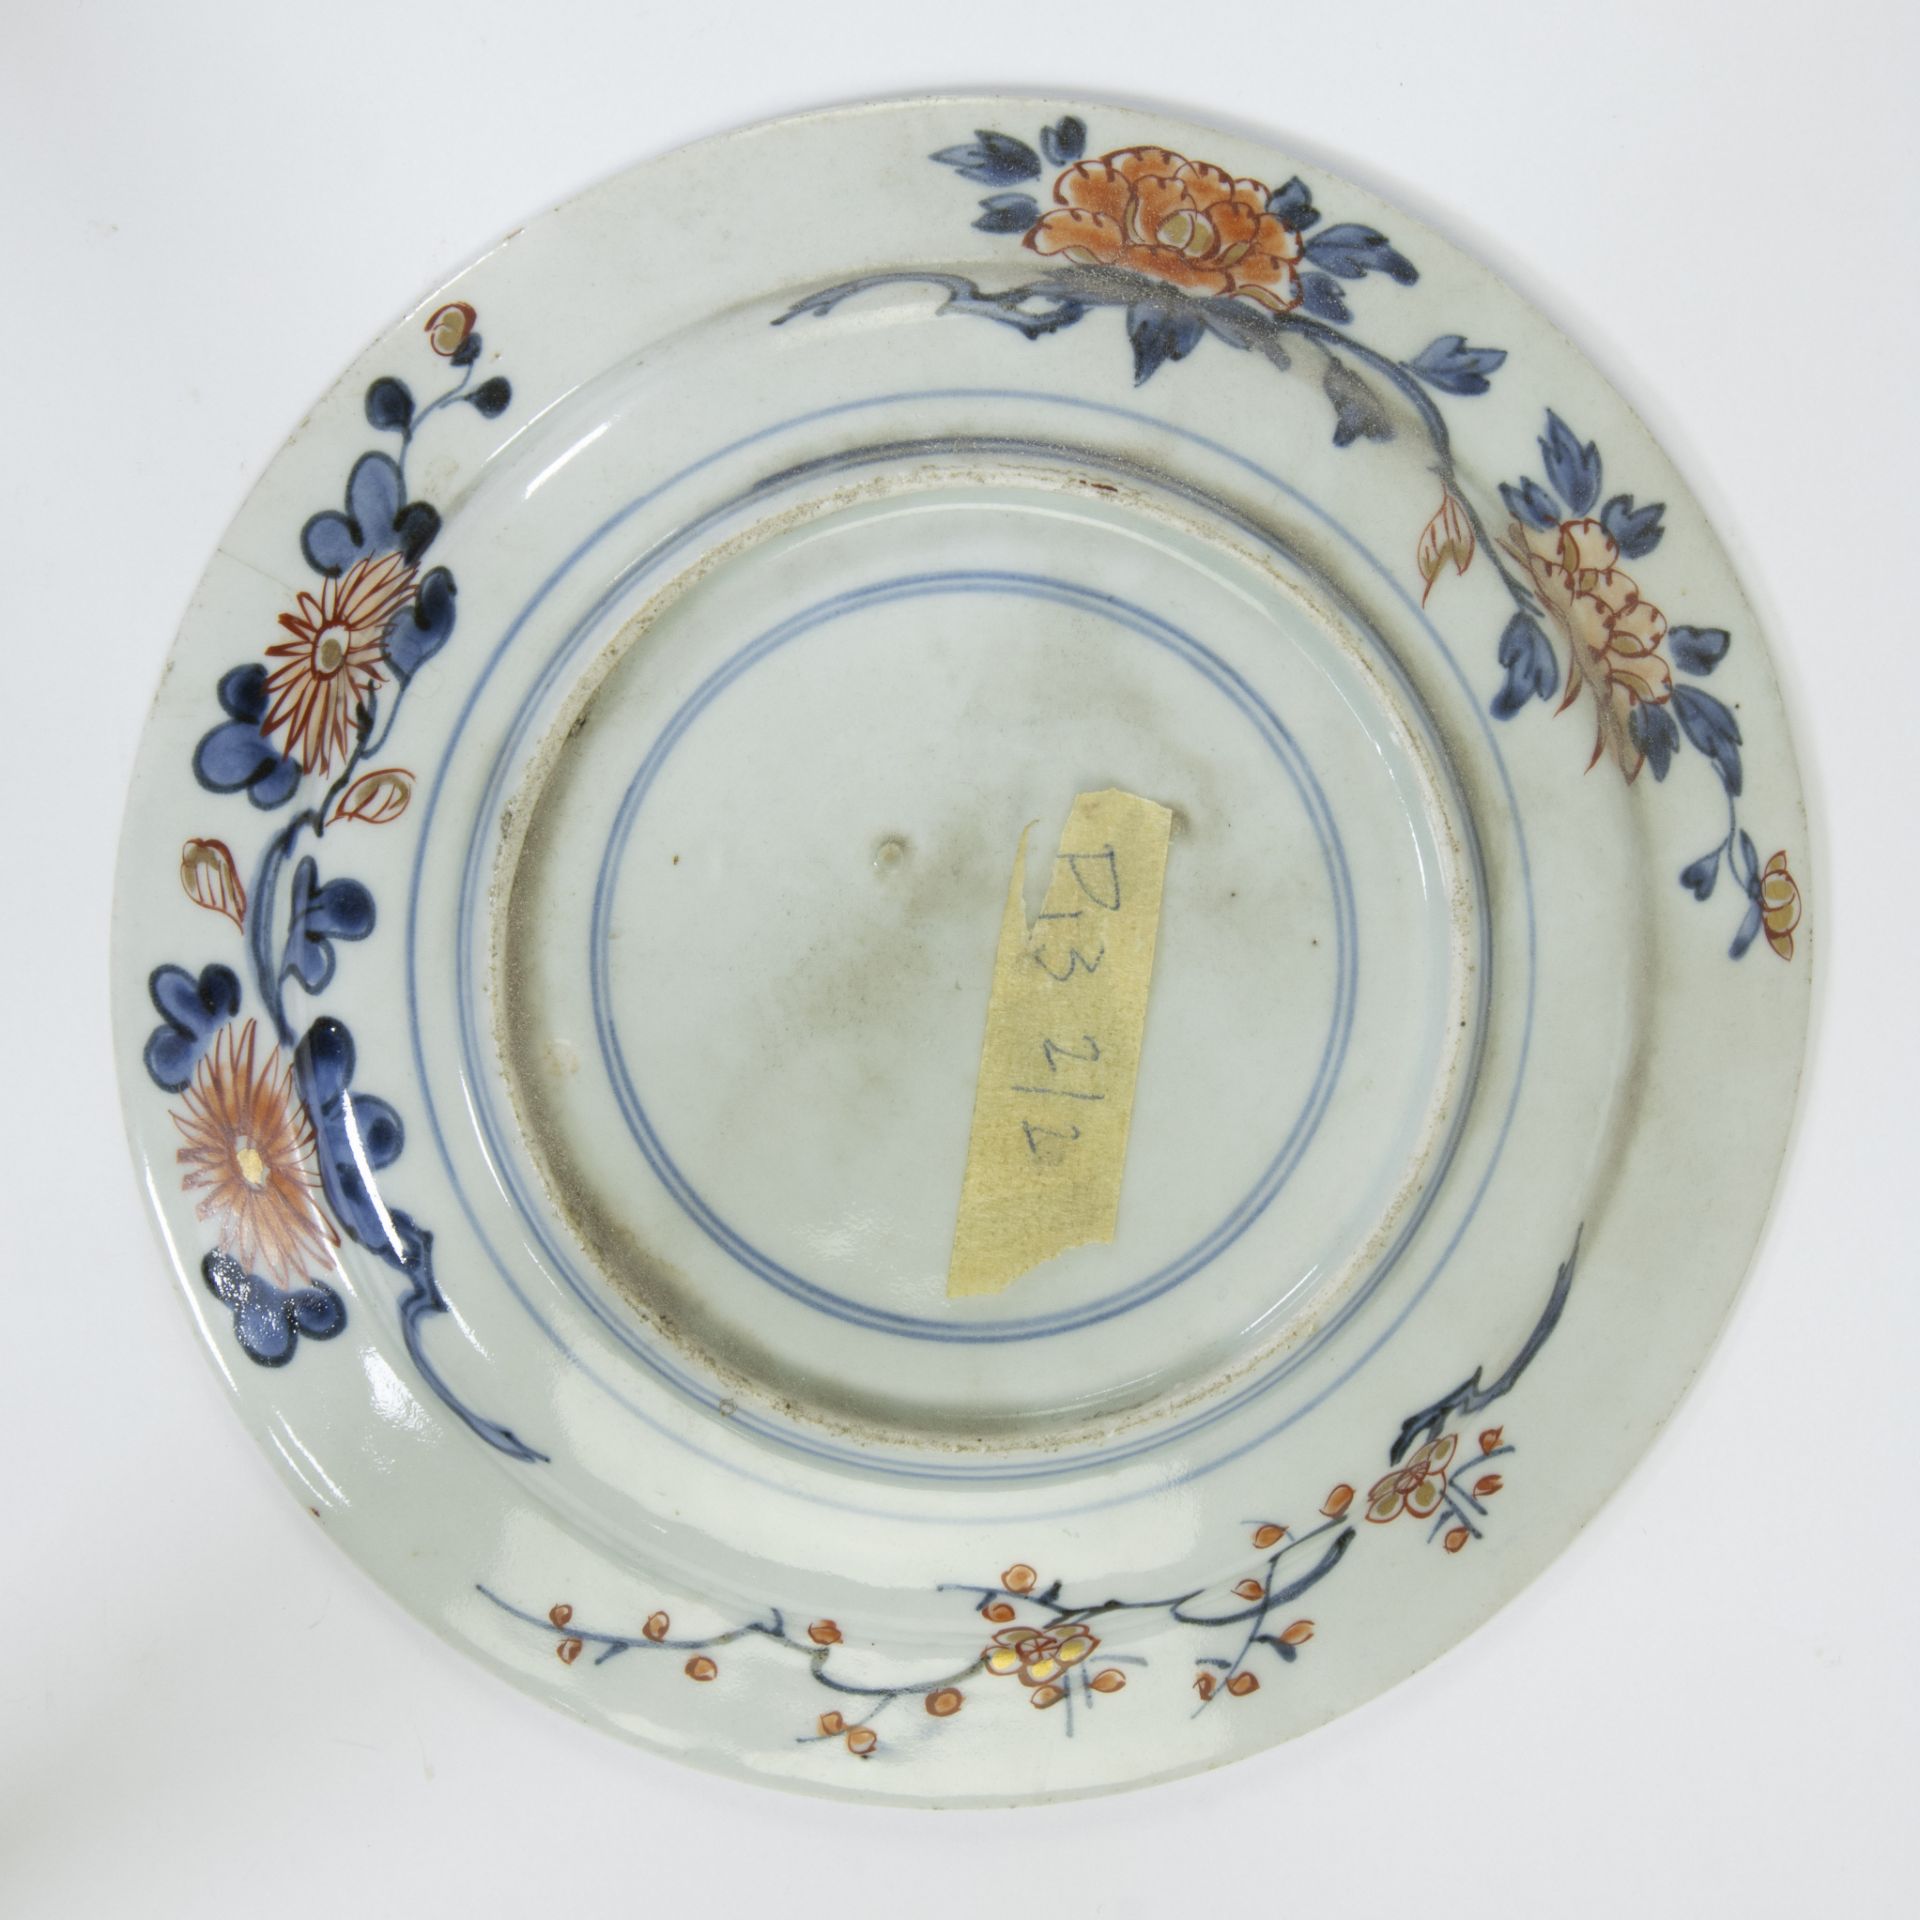 2 Chinese Imari plates and 4 blue and white plates, 18th century - Image 5 of 13